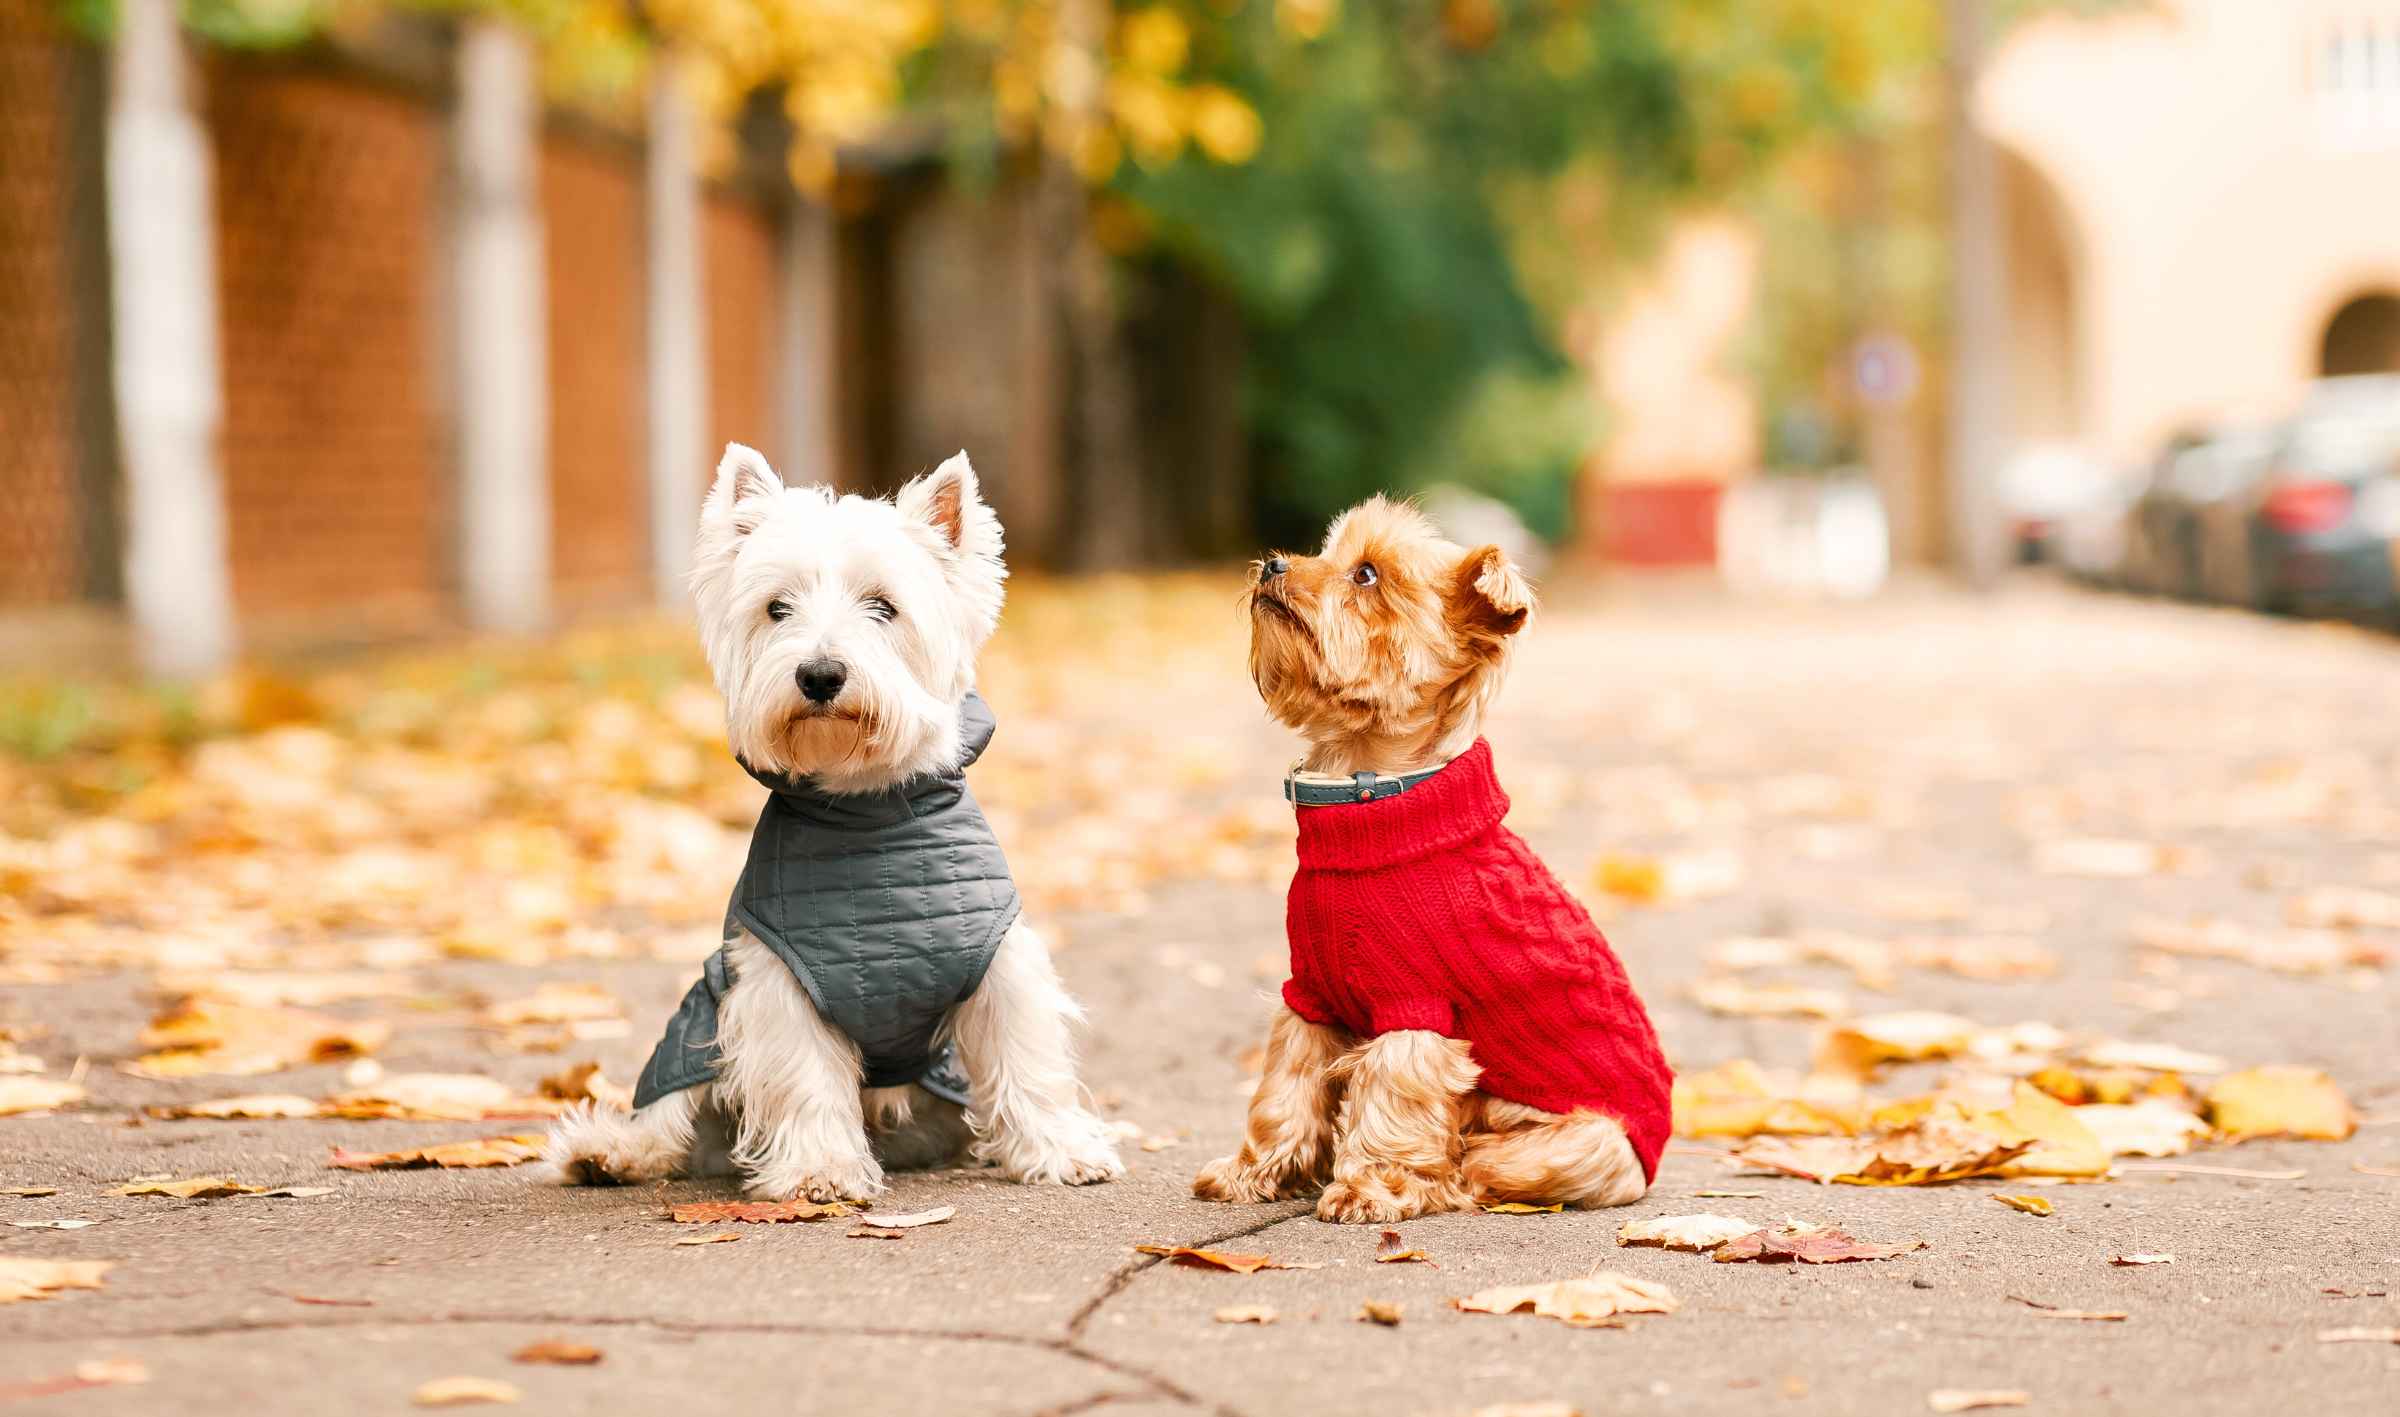 Dog Clothes, Dog Apparel, Dog Hoodie & Outfits